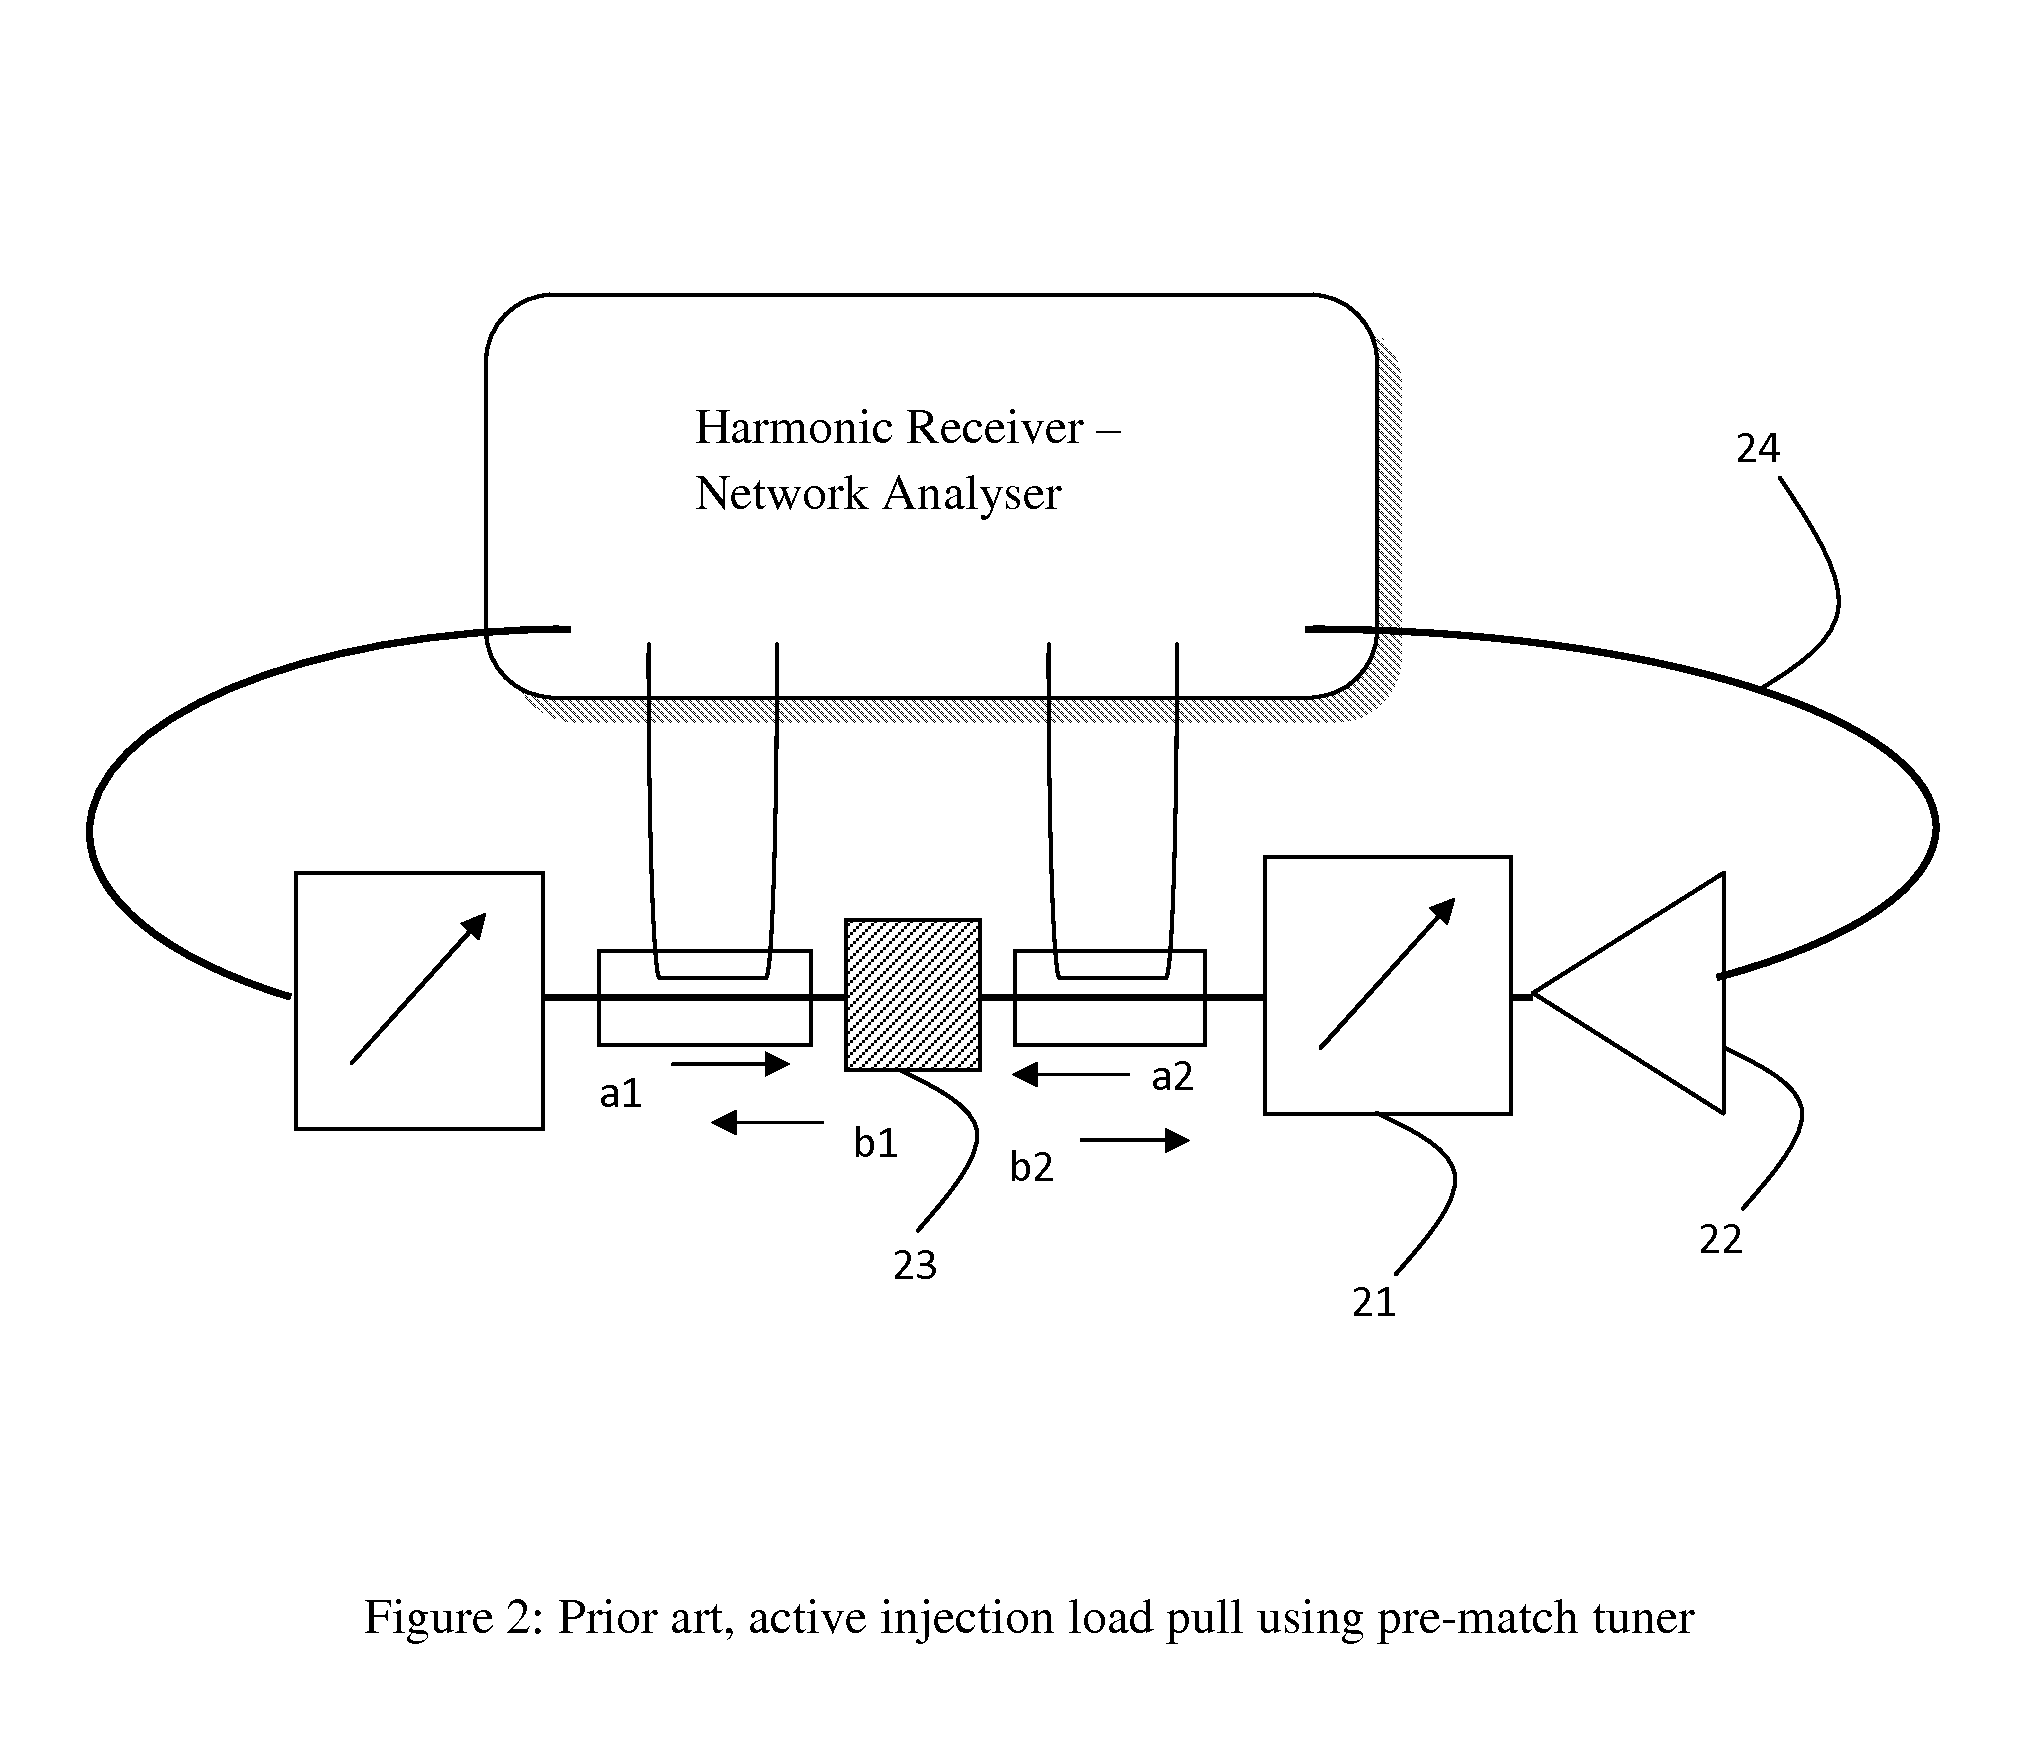 Multi-source active injection load pull system and method